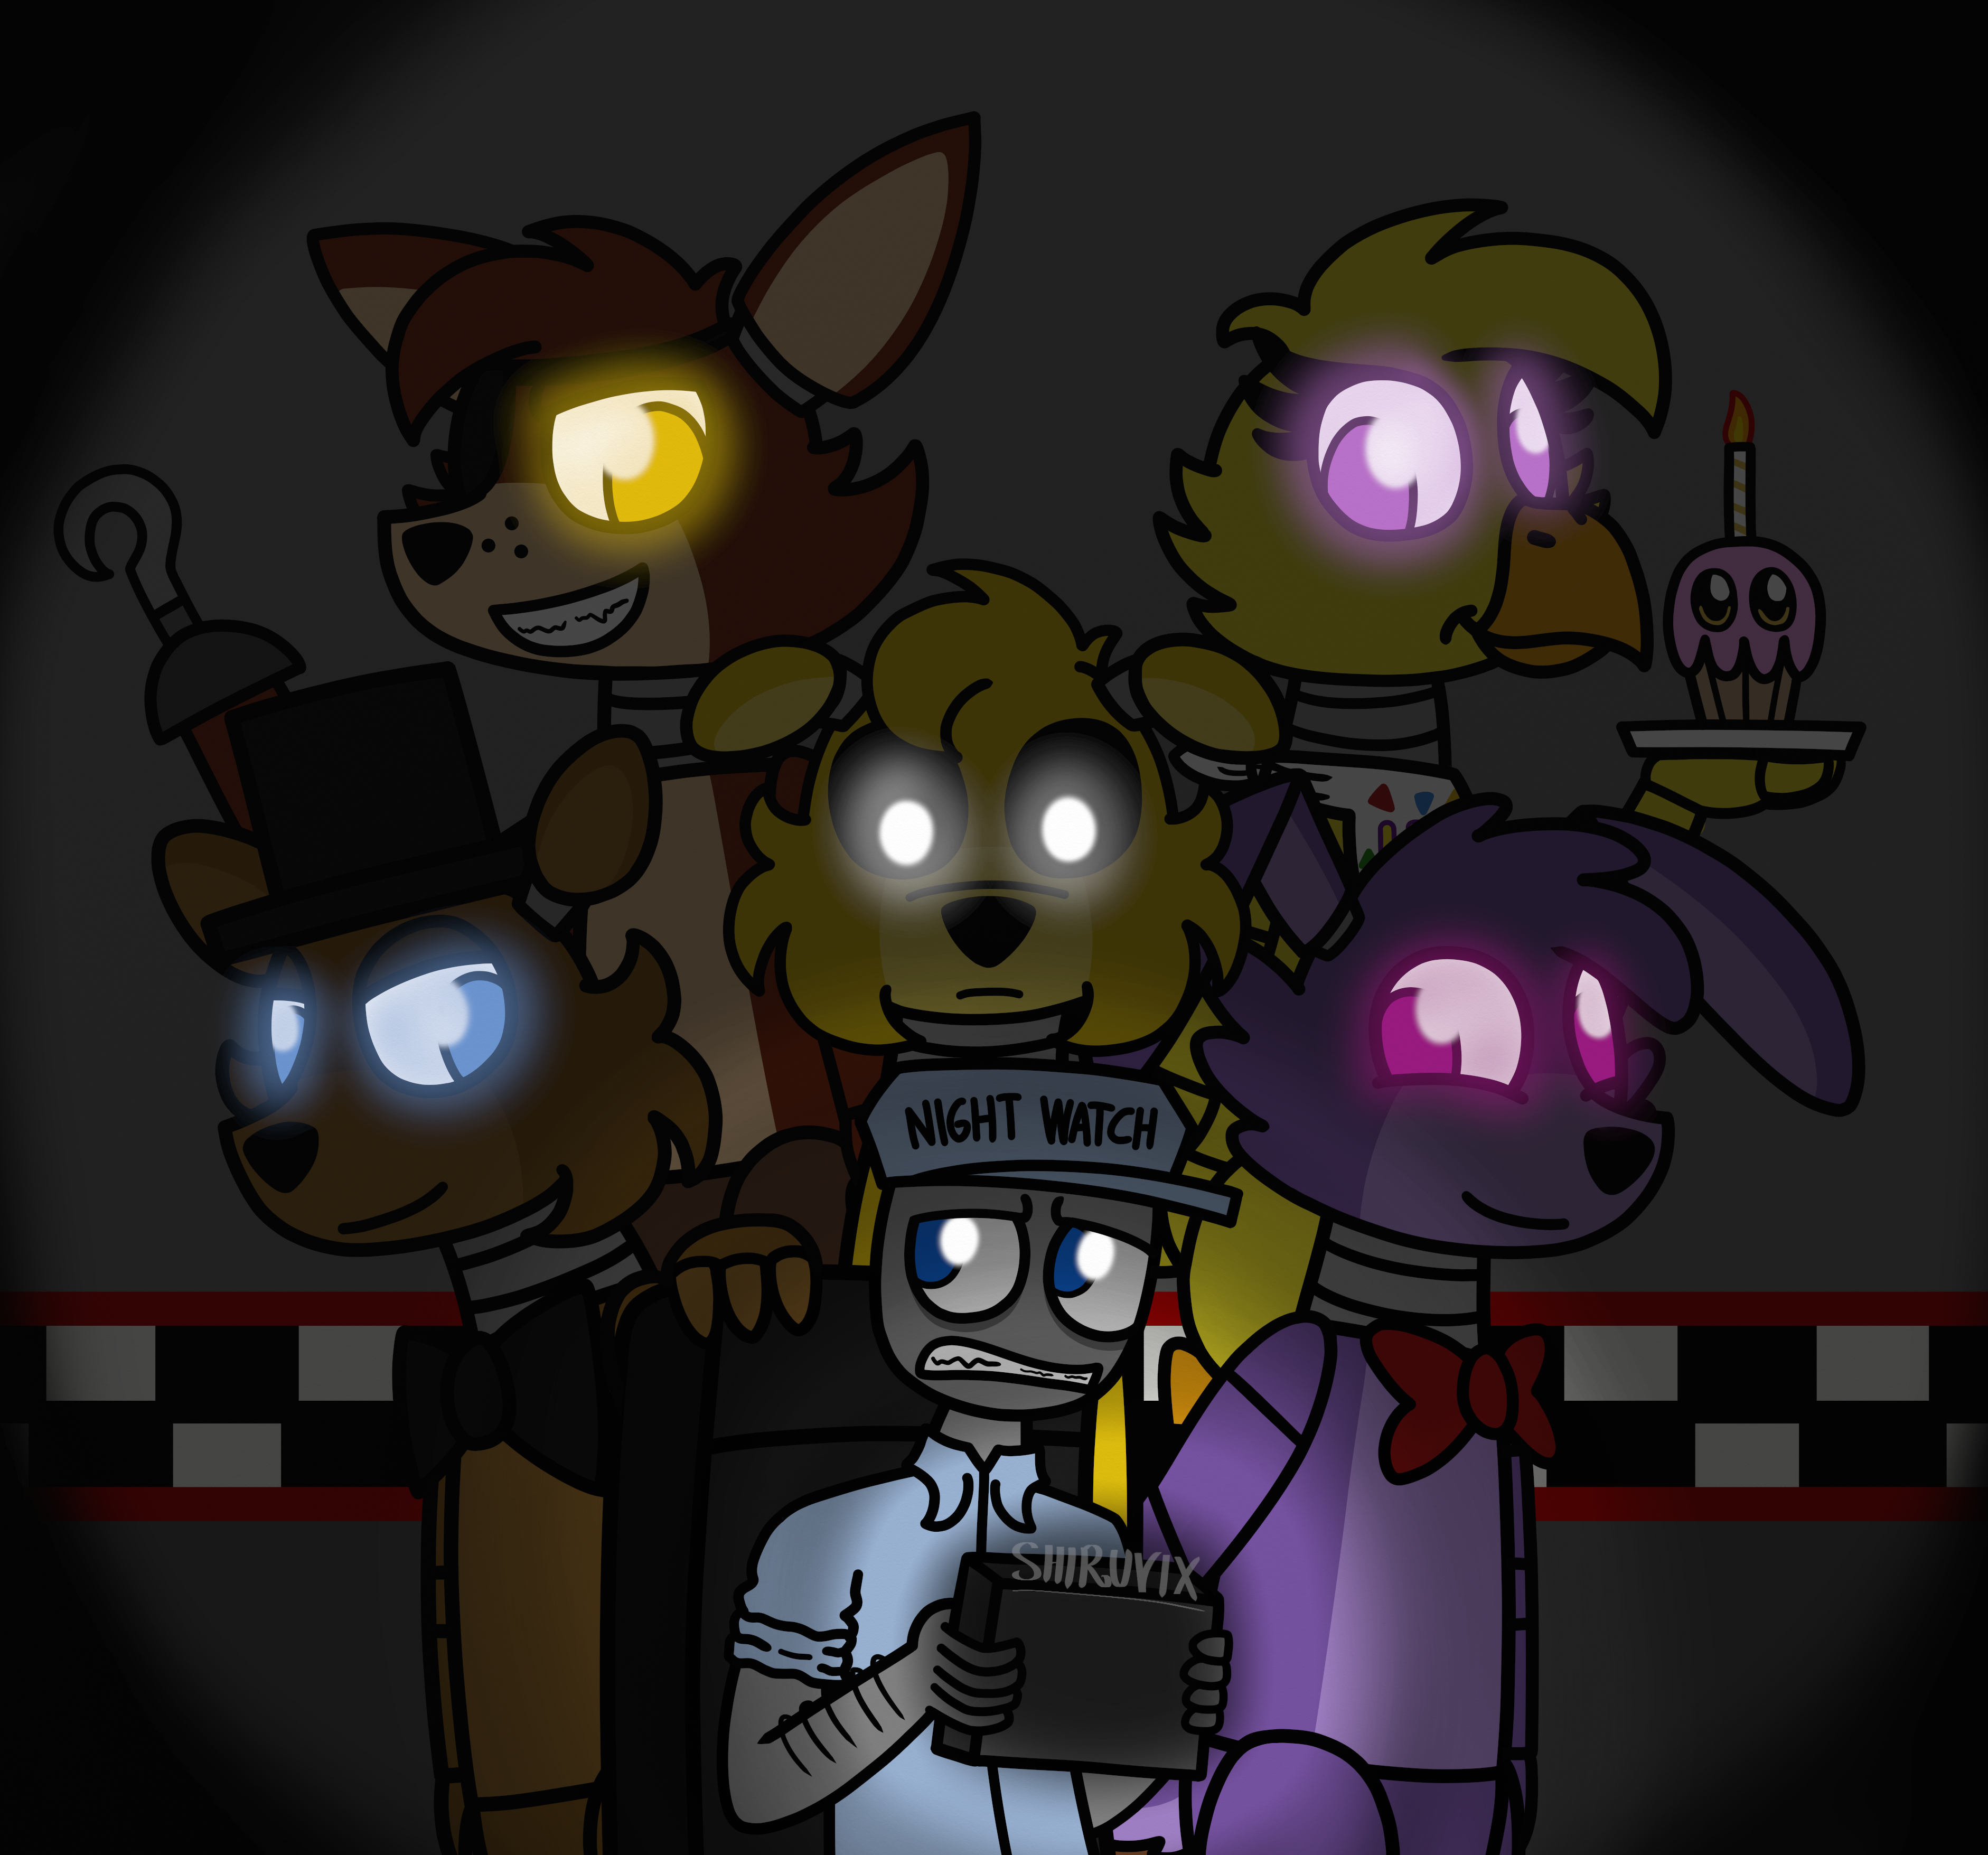 New and Shiny (Five Nights at Freddy's 2) by ArtyJoyful on DeviantArt